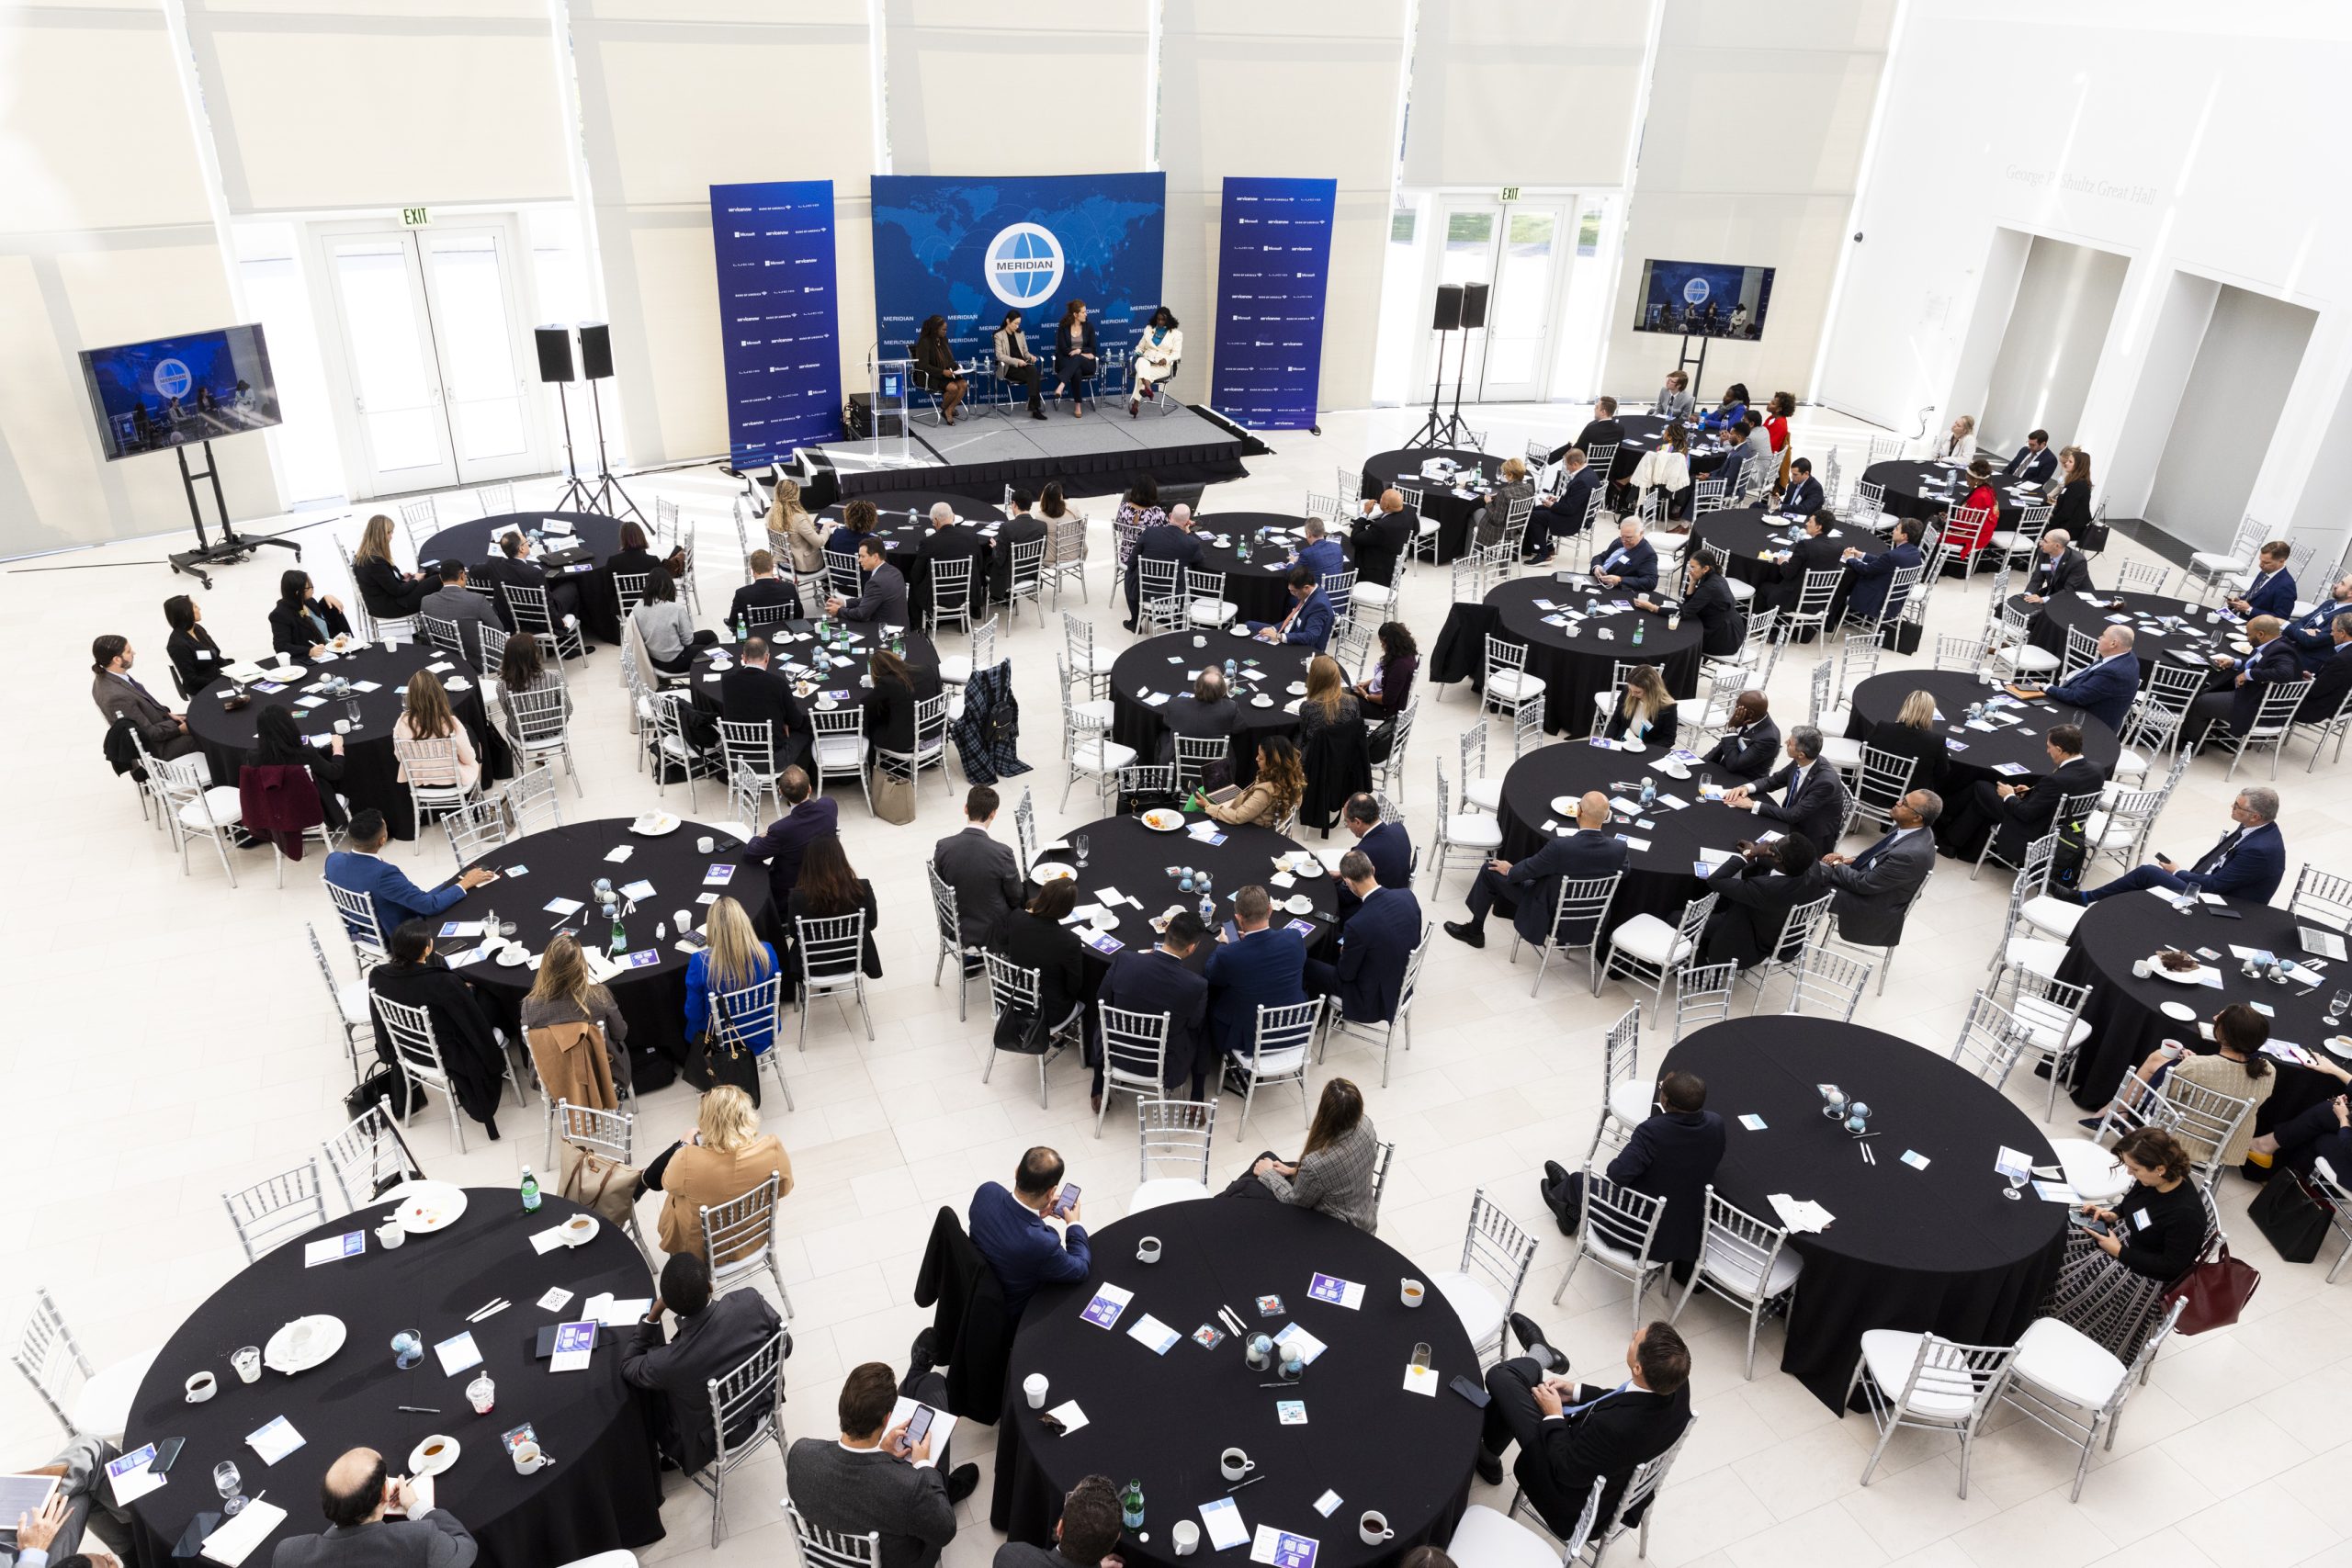 The 11th Annual Meridian Summit on “Preparing for Tech Transformation in a Digitalized World” was held on October 21, 2022, at the United States Institute of Peace in Washington, DC.